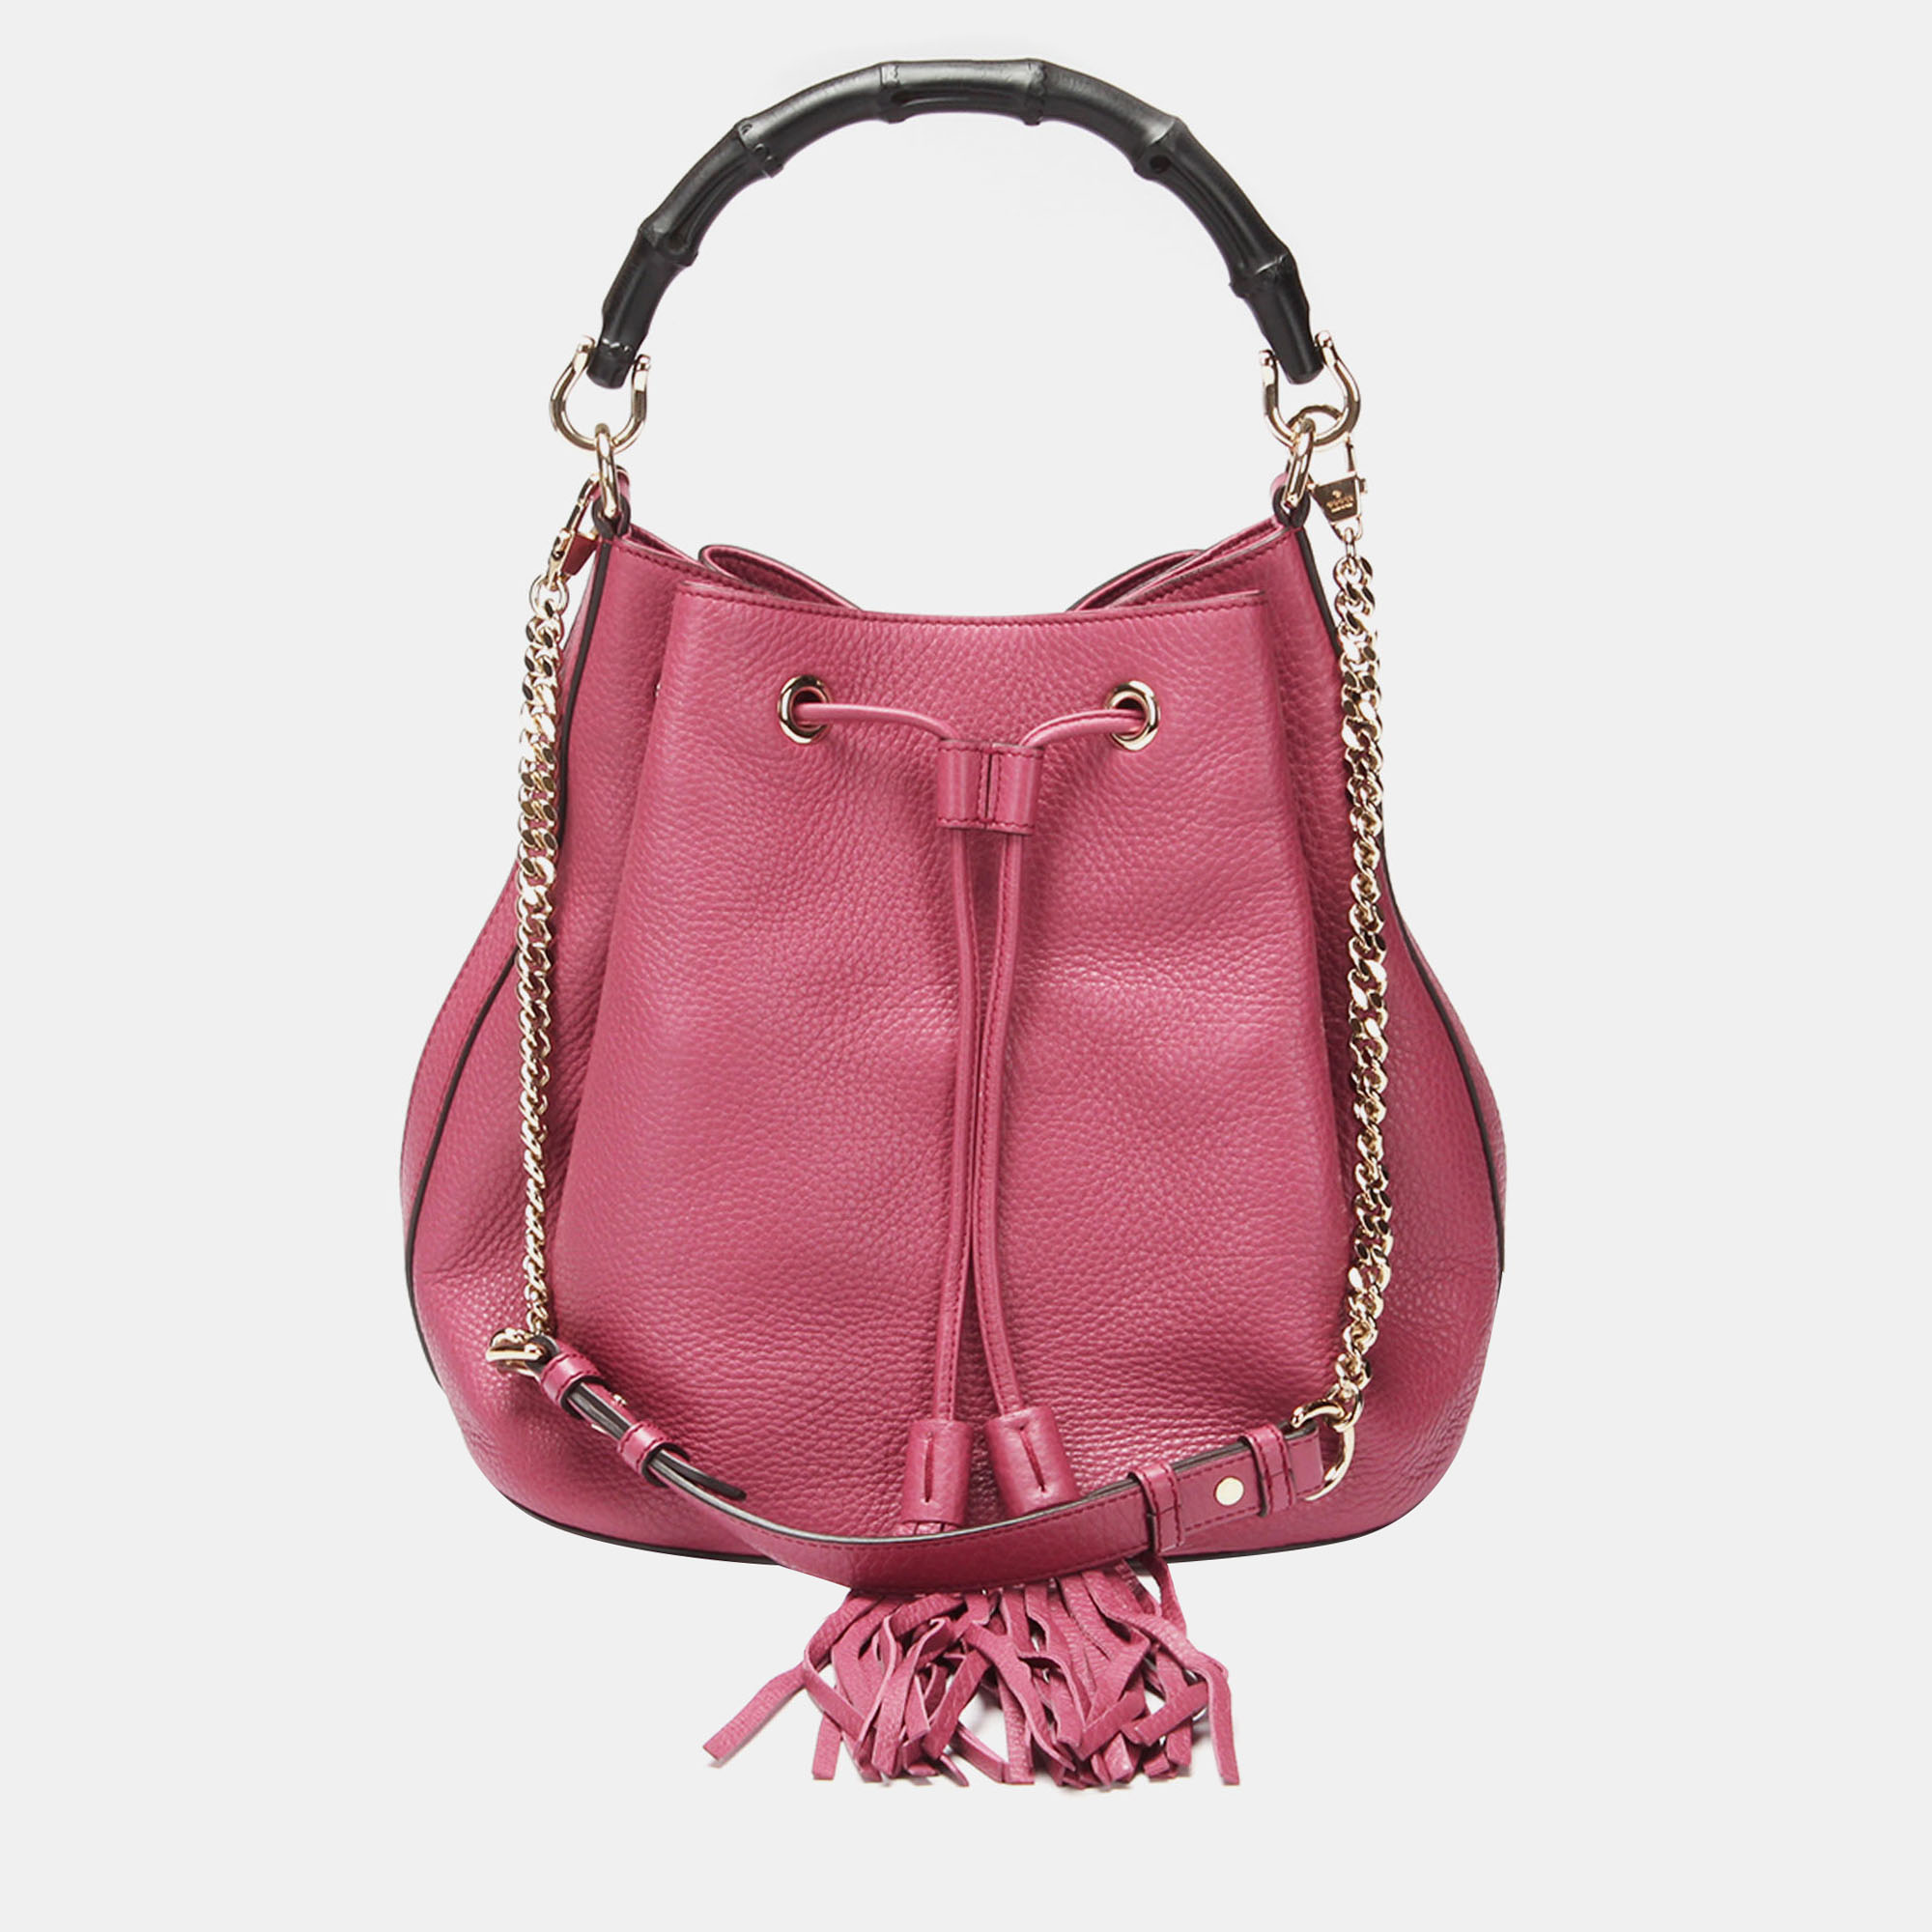 Gucci pink leather miss bamboo bucket drawstring bag